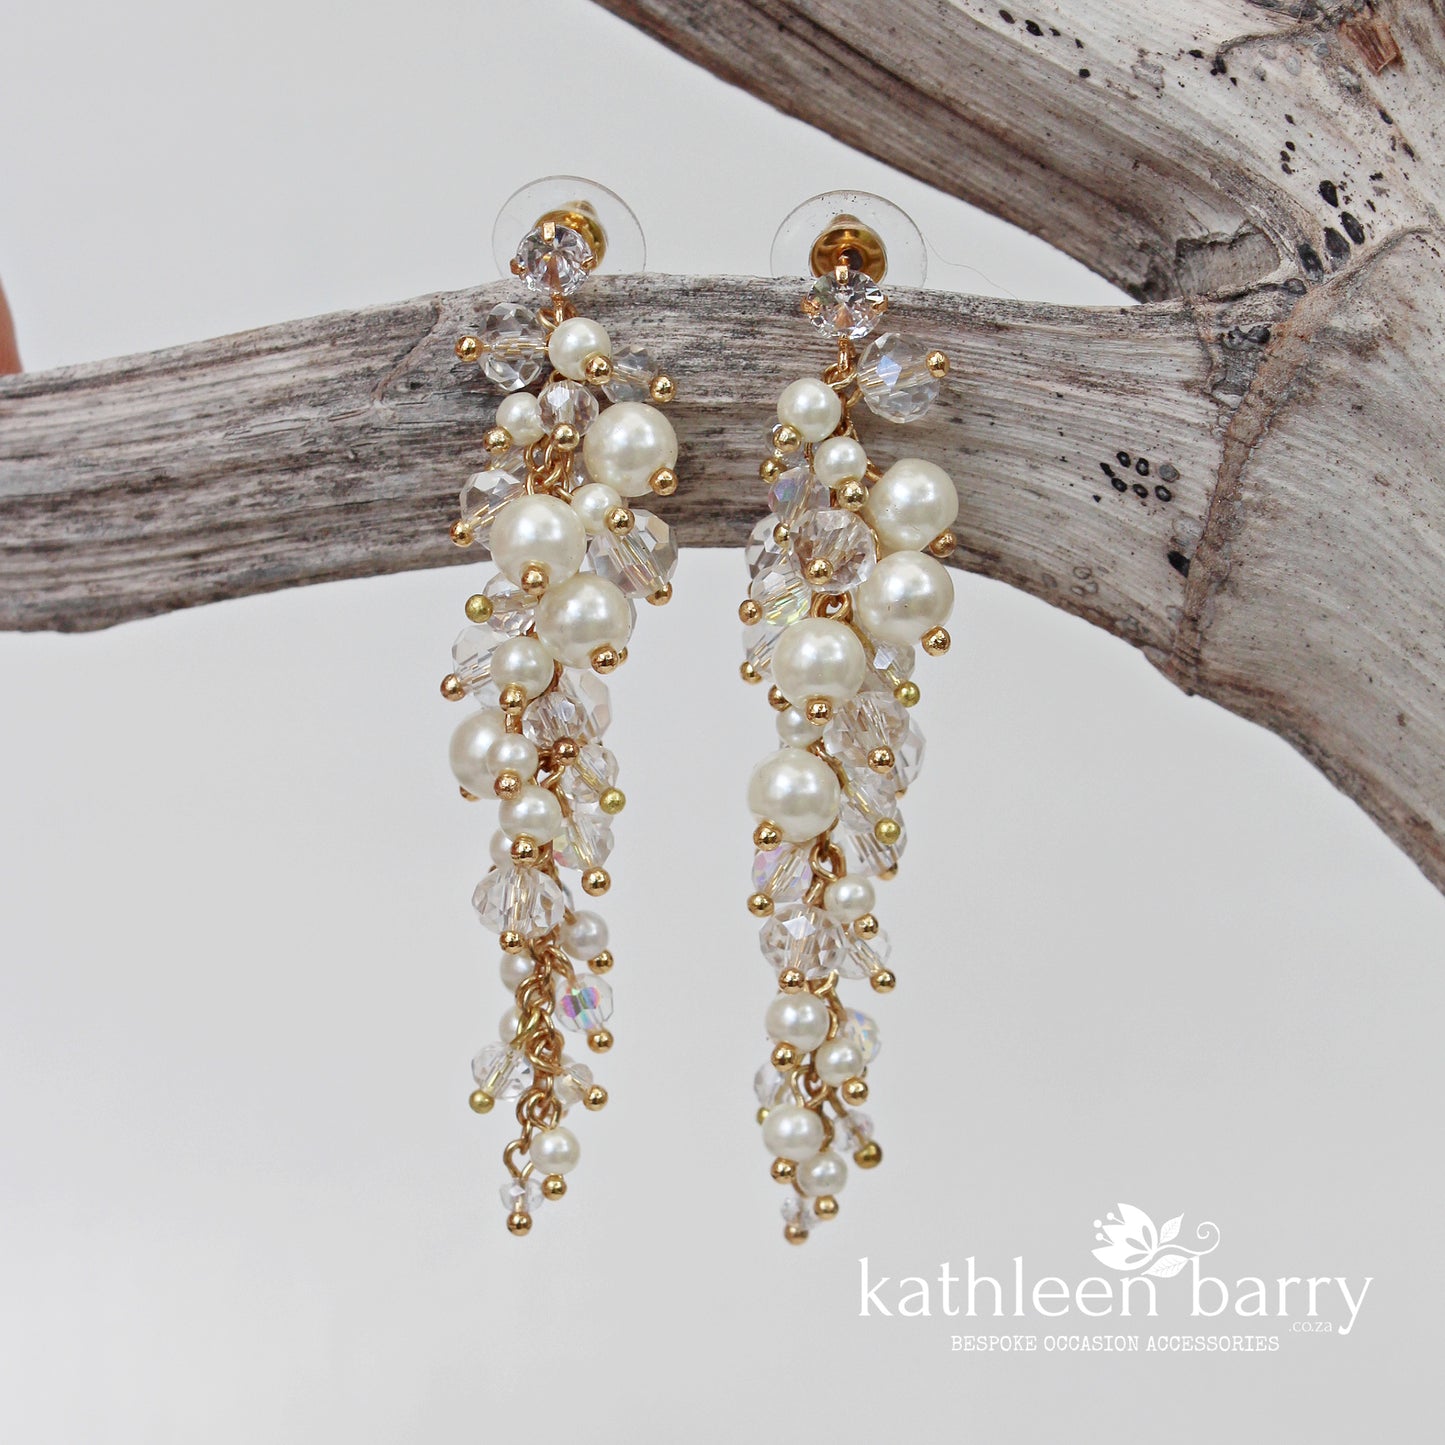 Lara Earrings (mini) - Cluster Crystal & Pearl Wedding Earrings - Available in Silver or gold finish